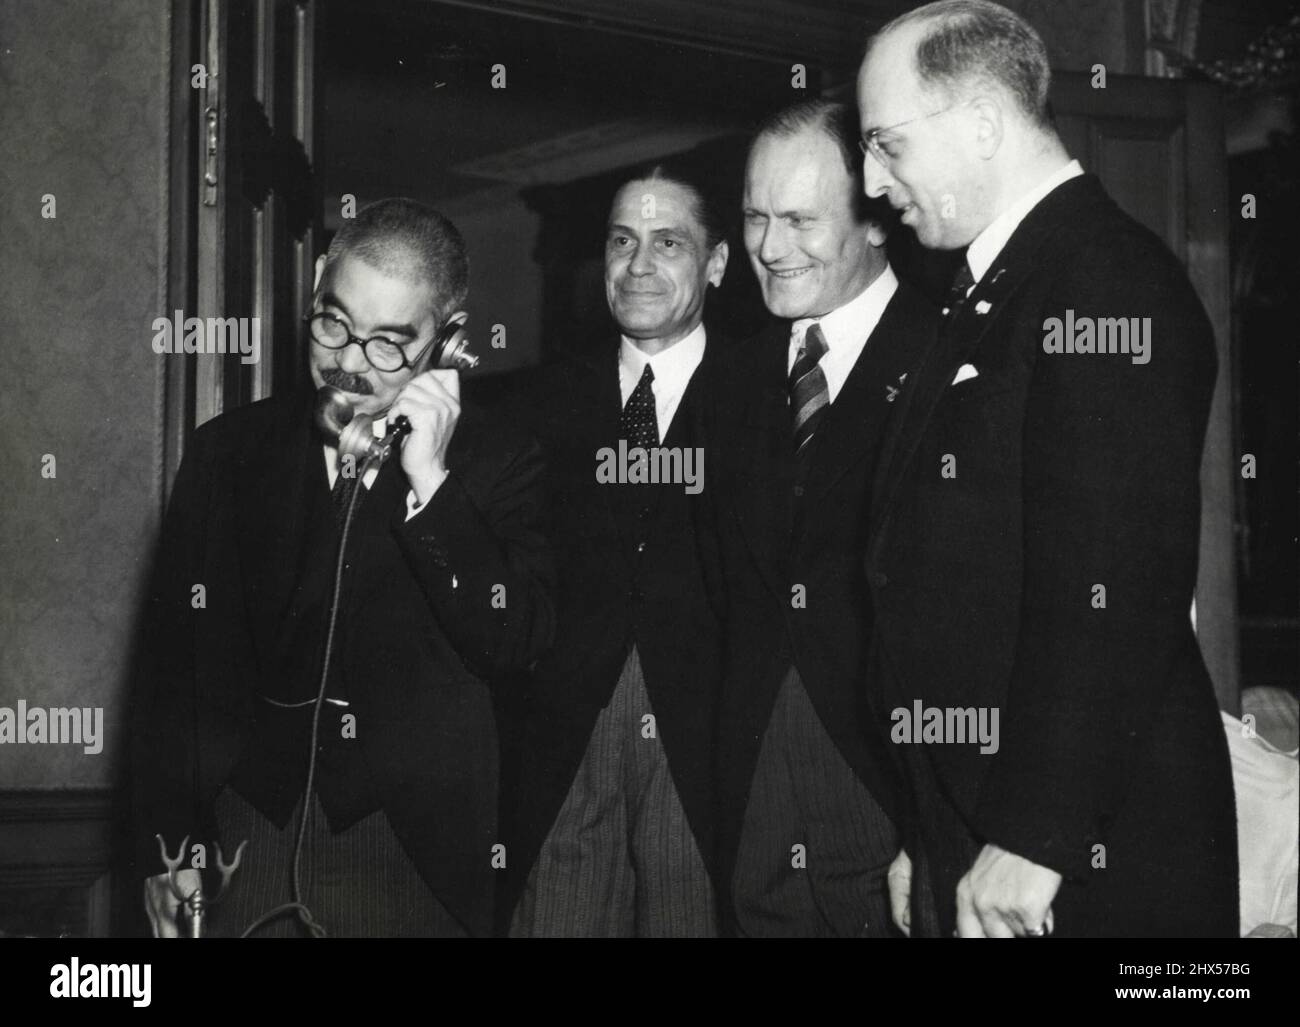 Japan, Germany And Italy Form Mutual Assistance Pact - Foreign minister Yosuke Matsuoka in a telephone conversation wilt Berlin soon after the signing of the German-Italian-Japanese mutual assistance pact there at Chancellor Hitler's chancellery. He is exchanging salutations with German Foreign Minister Joachim Von Ribbentrop and Italian Foreign Minister Galeazzo Ciano. Shown beside him are, left to right: Italian Ambassador Mario Indelli, German Ambassador Eugen Ott, and German minister-at-large Stahmer, who played an important role in the conclusion of the tripartite alliance. October 28, 19 Stock Photo